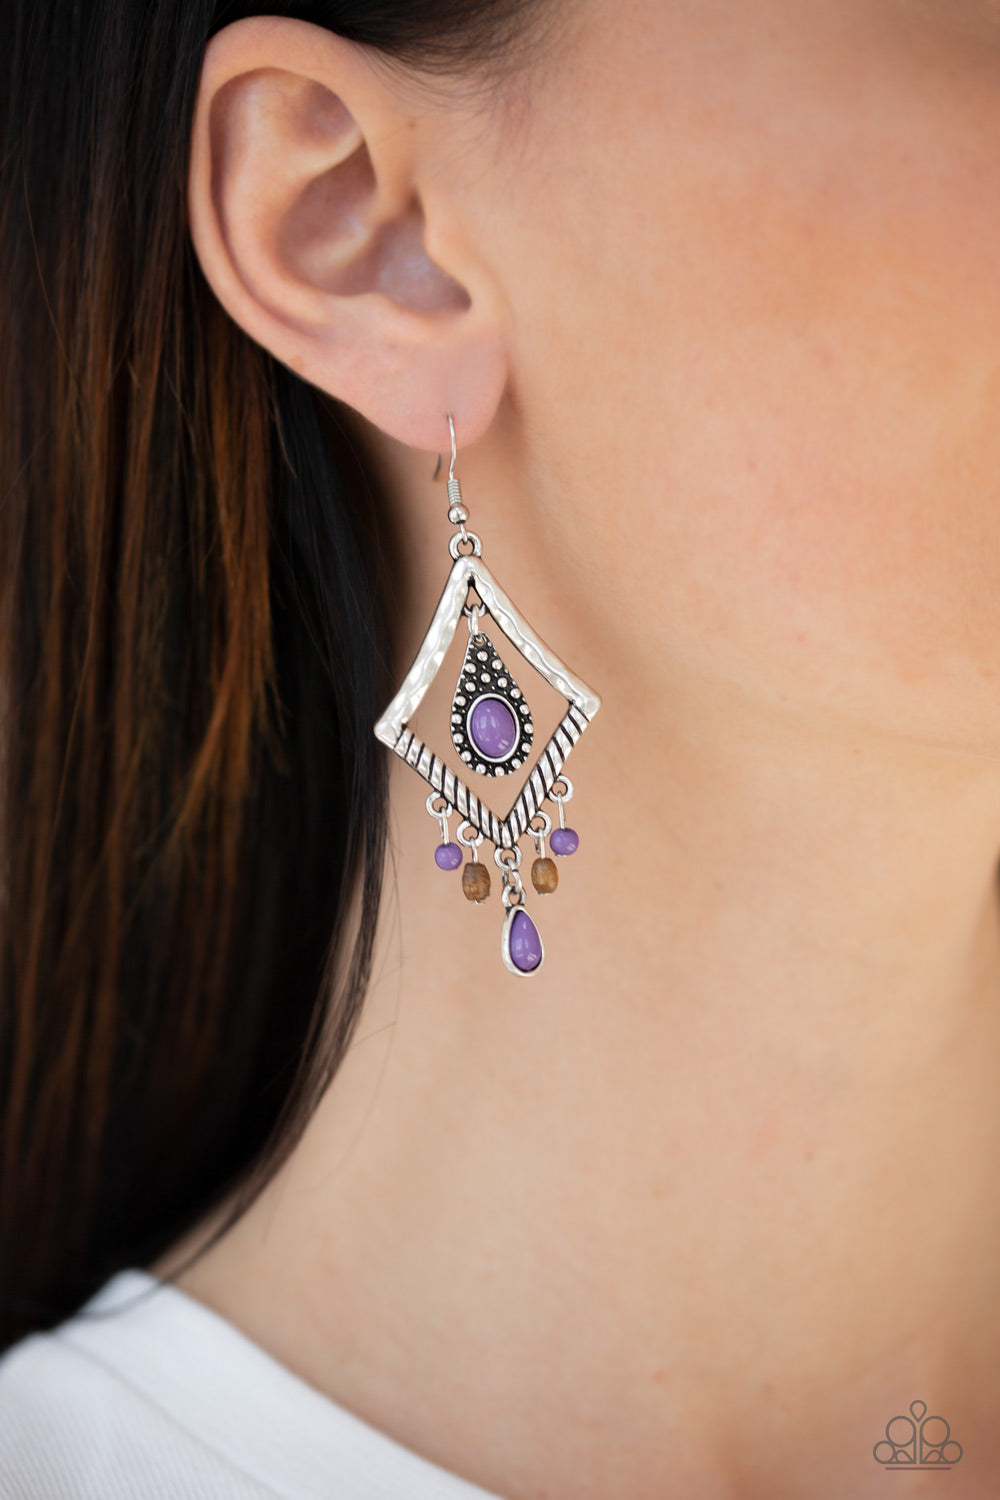 Southern Sunsets- Purple and Silver Earrings- Paparazzi Accessories